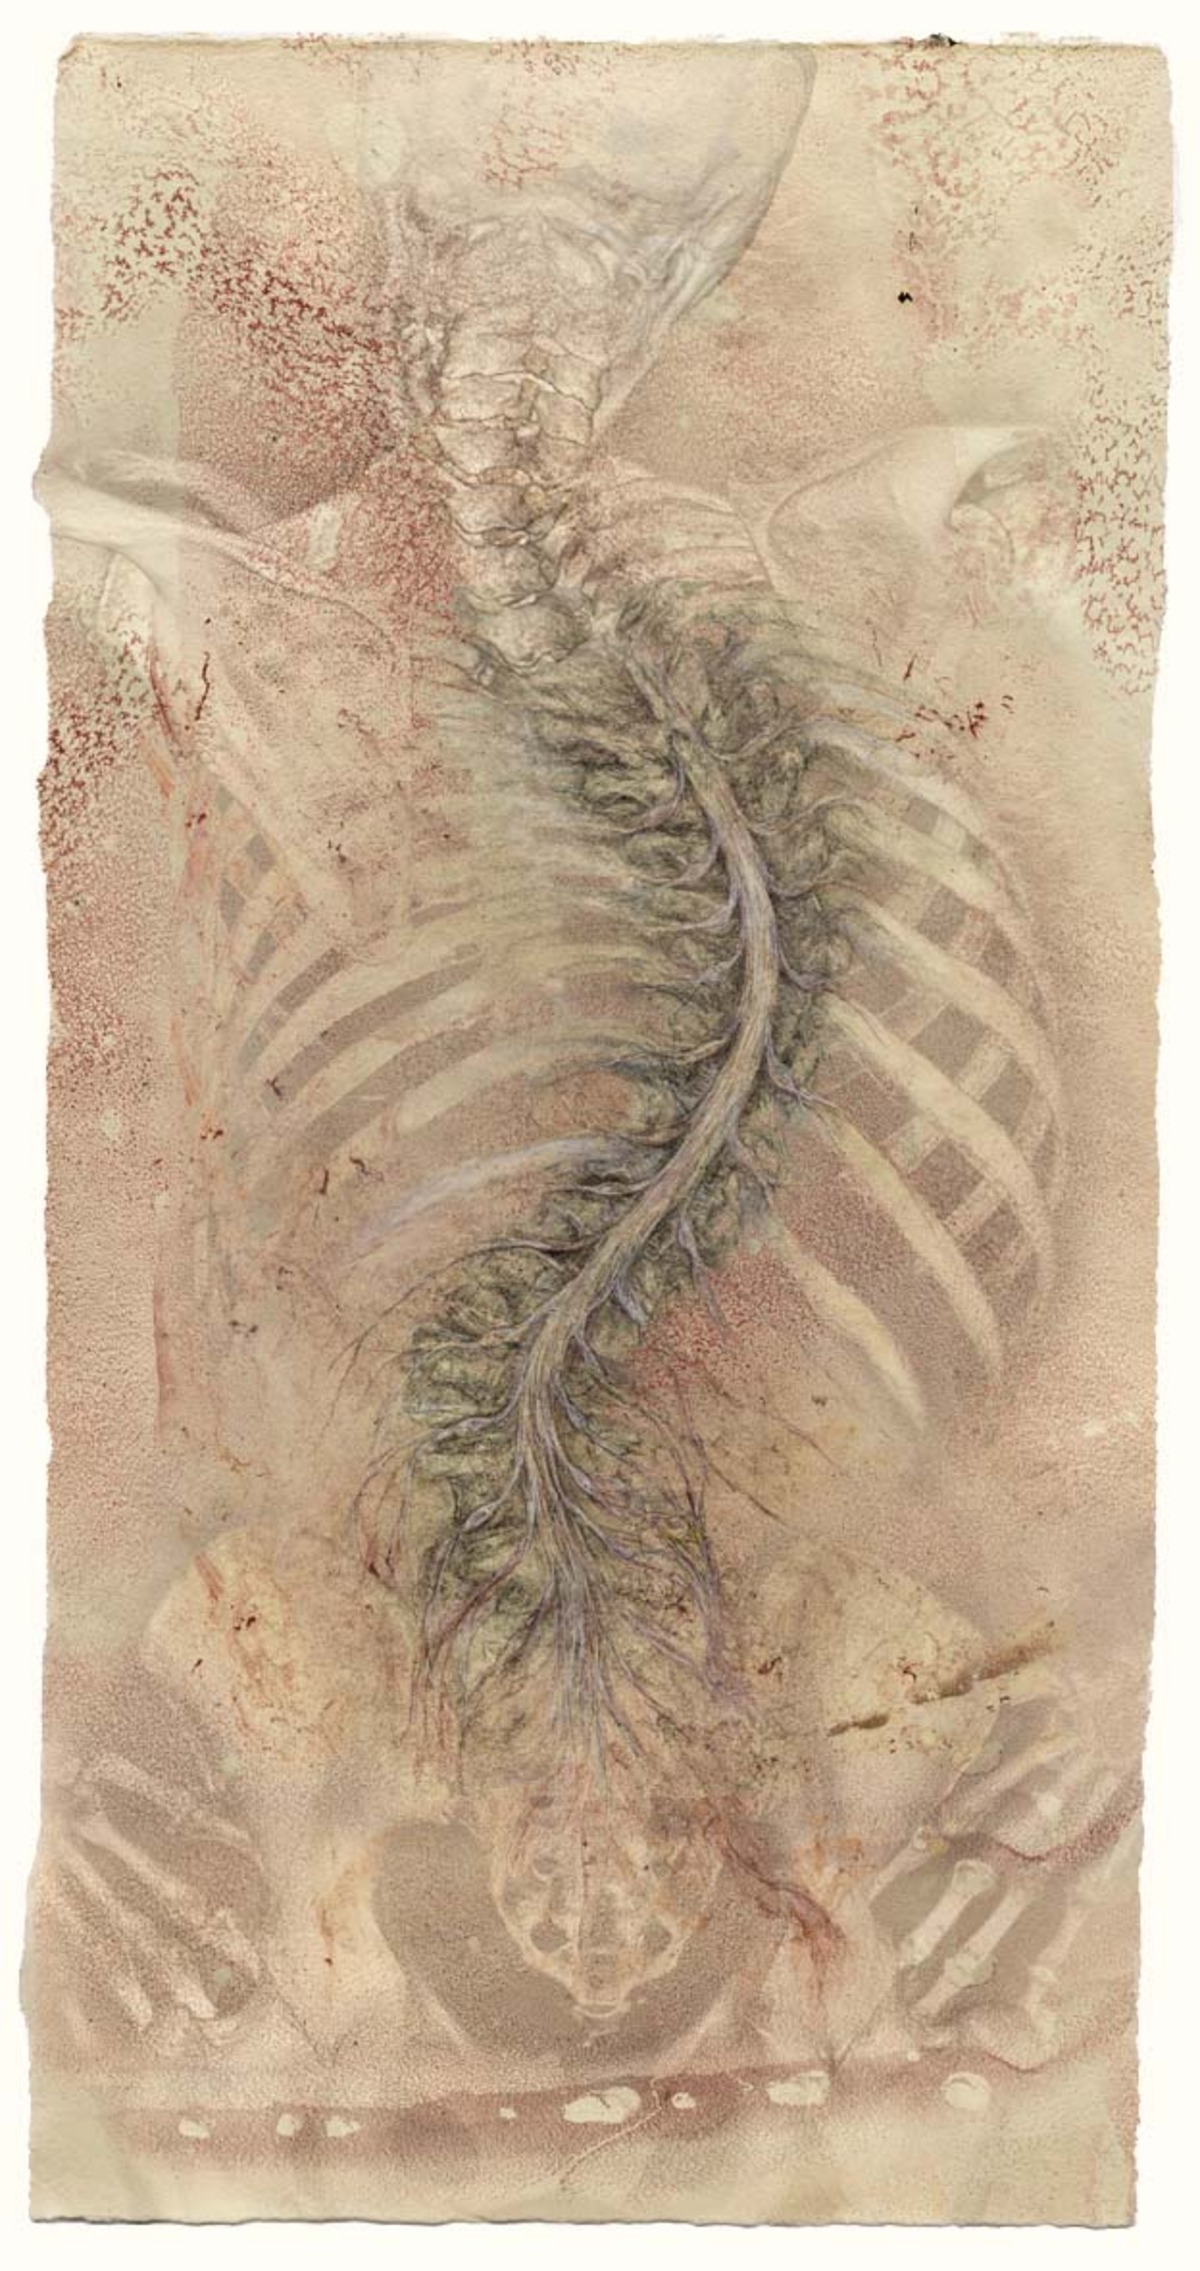  Spinal cord scroll 